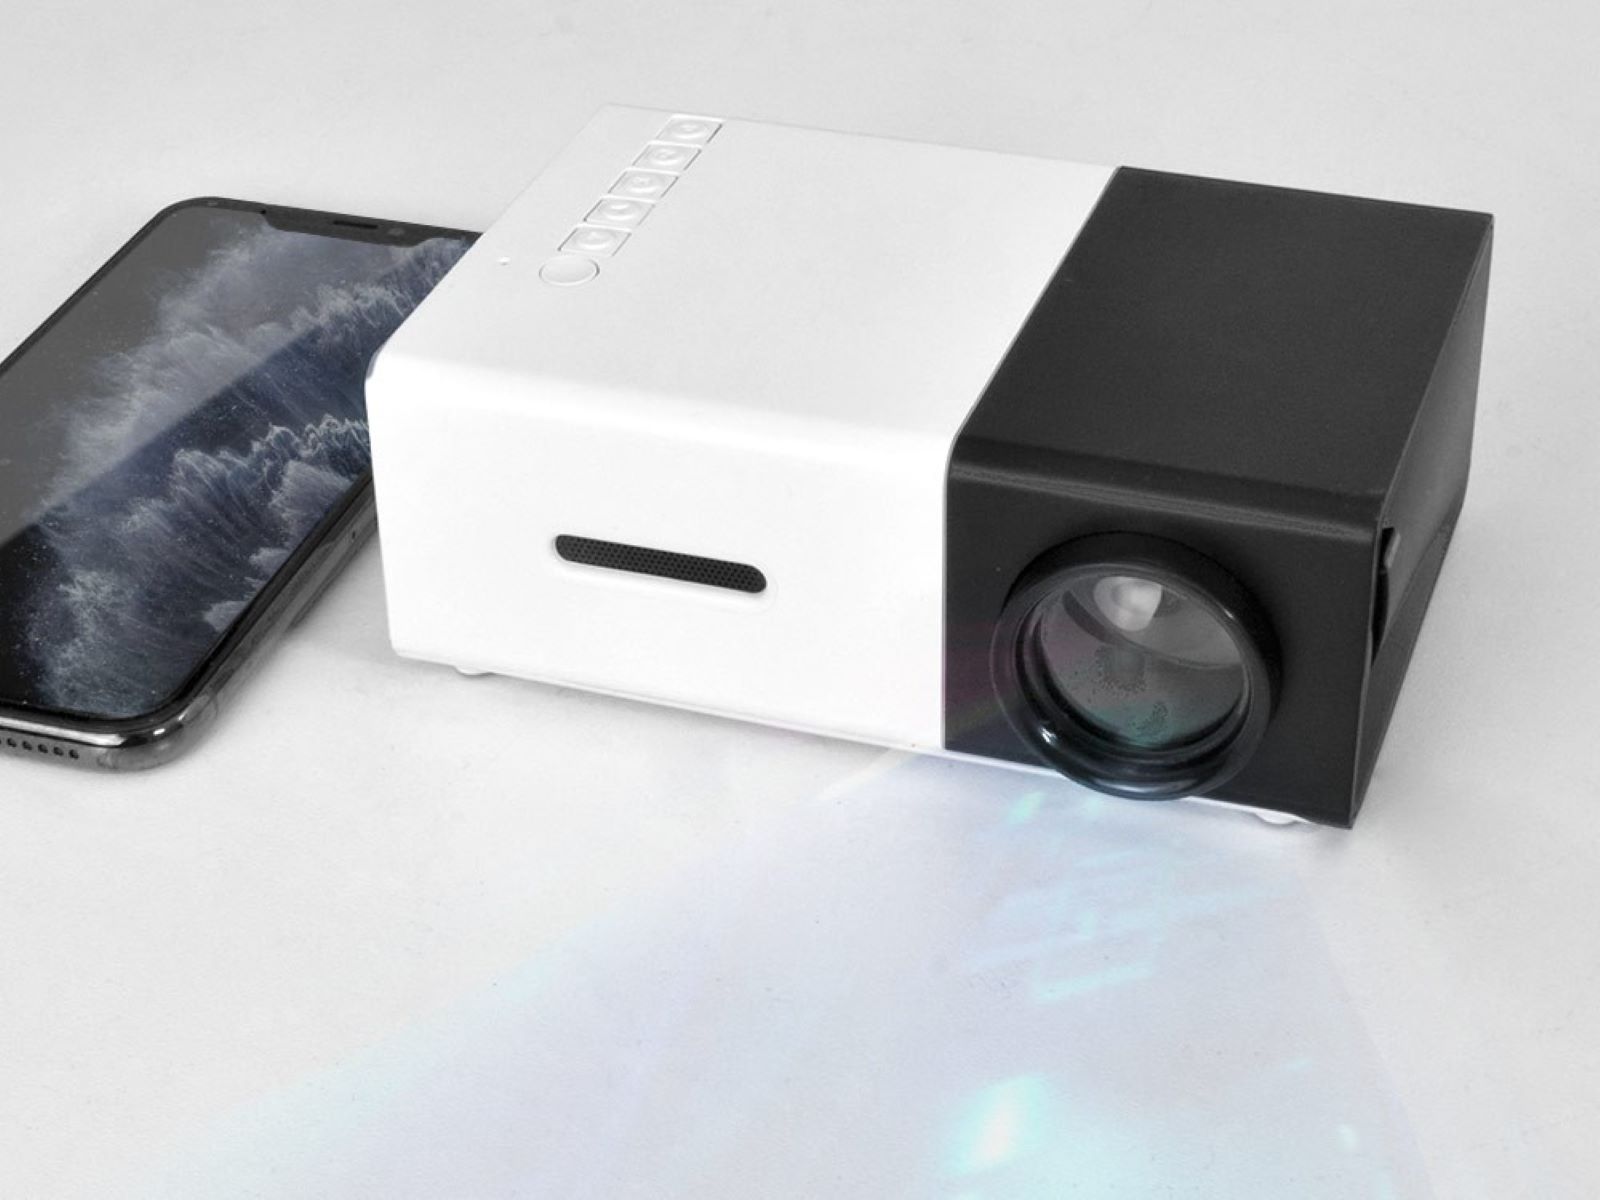 connecting-high-peak-mini-projector-to-phone-step-by-step-instructions